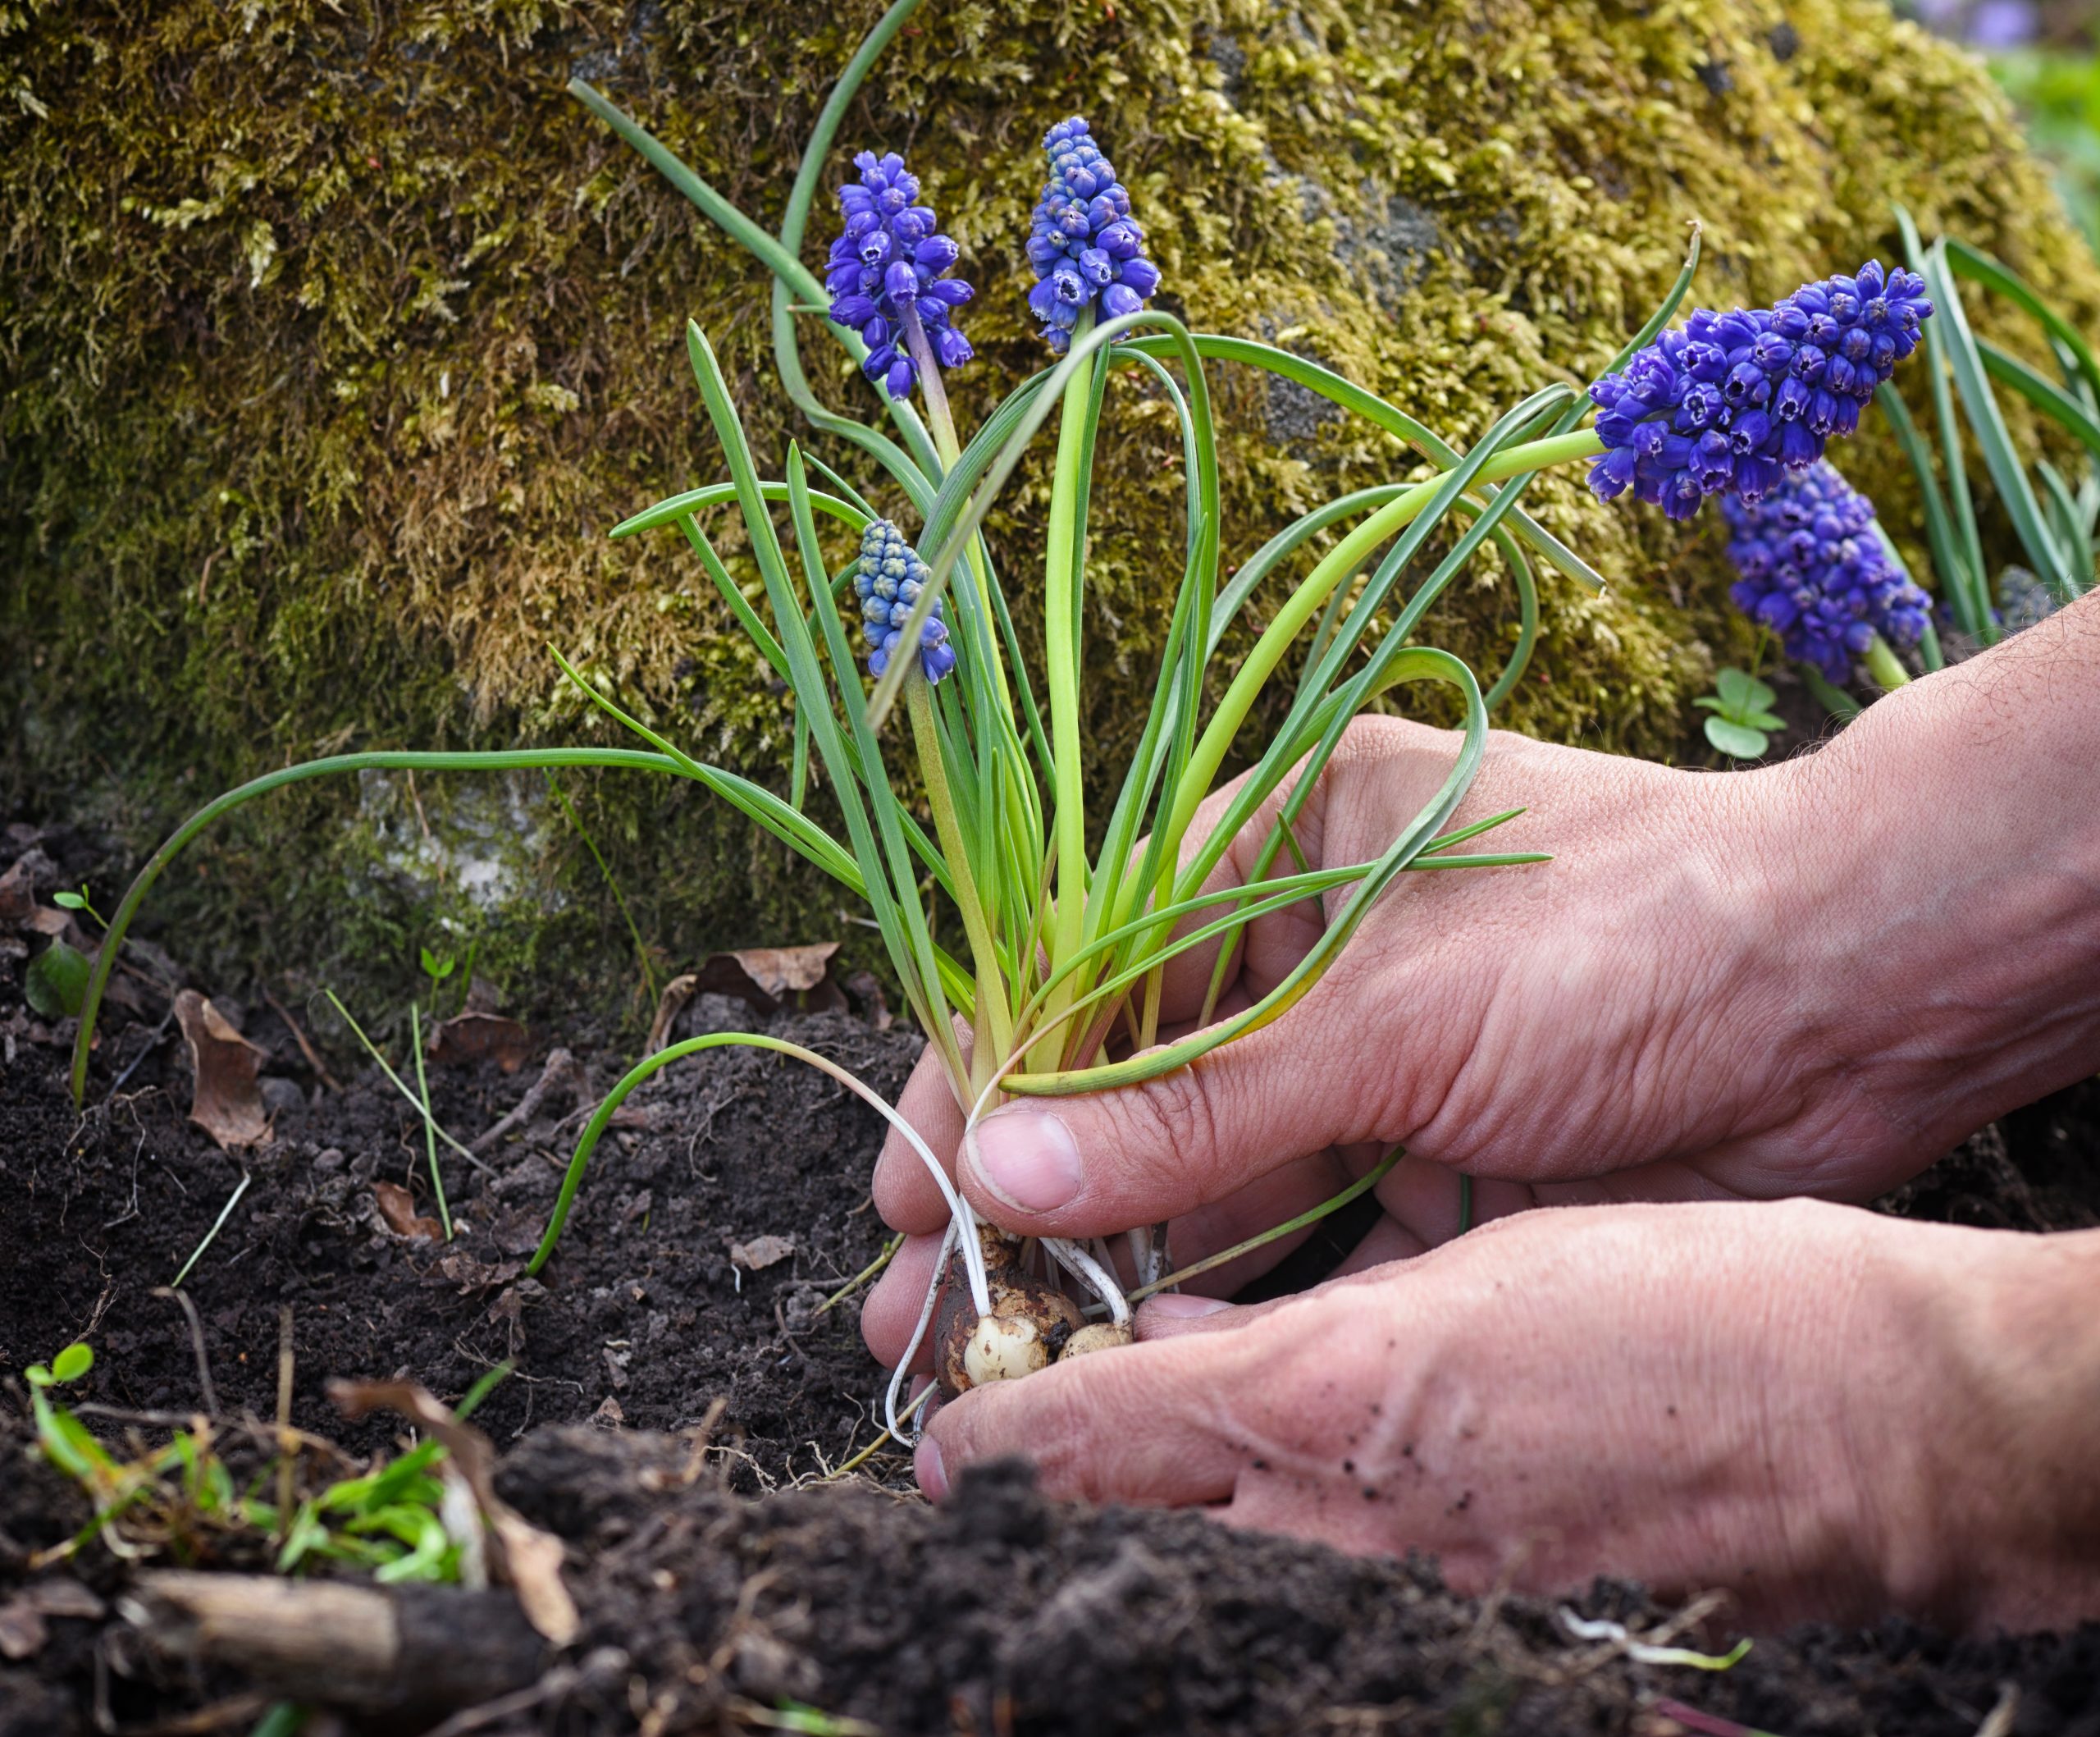 Midlands Compost - gardener planting muscari flowers in the garden sp 7BX23F5 scaled